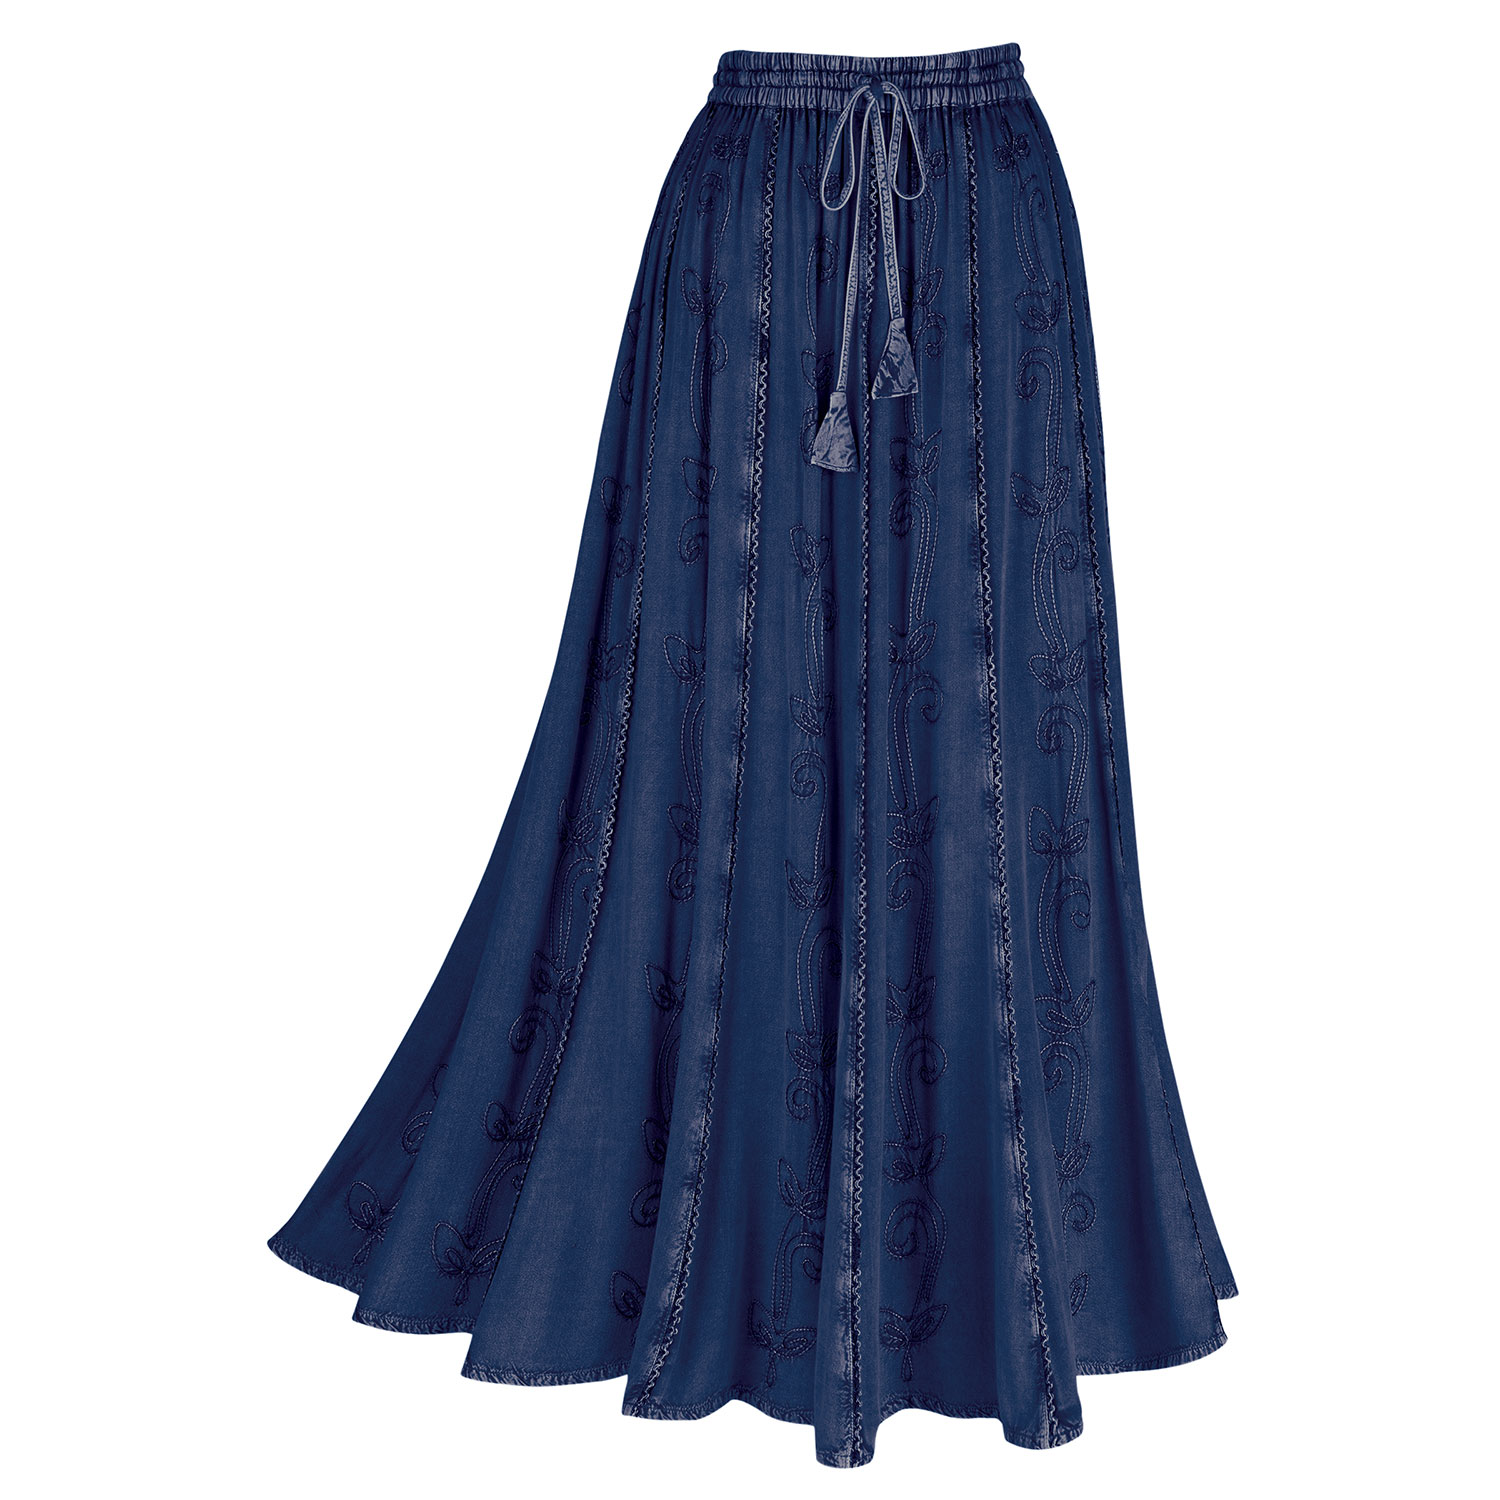 CATALOG CLASSICS Women's Floral Embroidered Maxi Skirt -Ankle Length Long Peasant Skirt